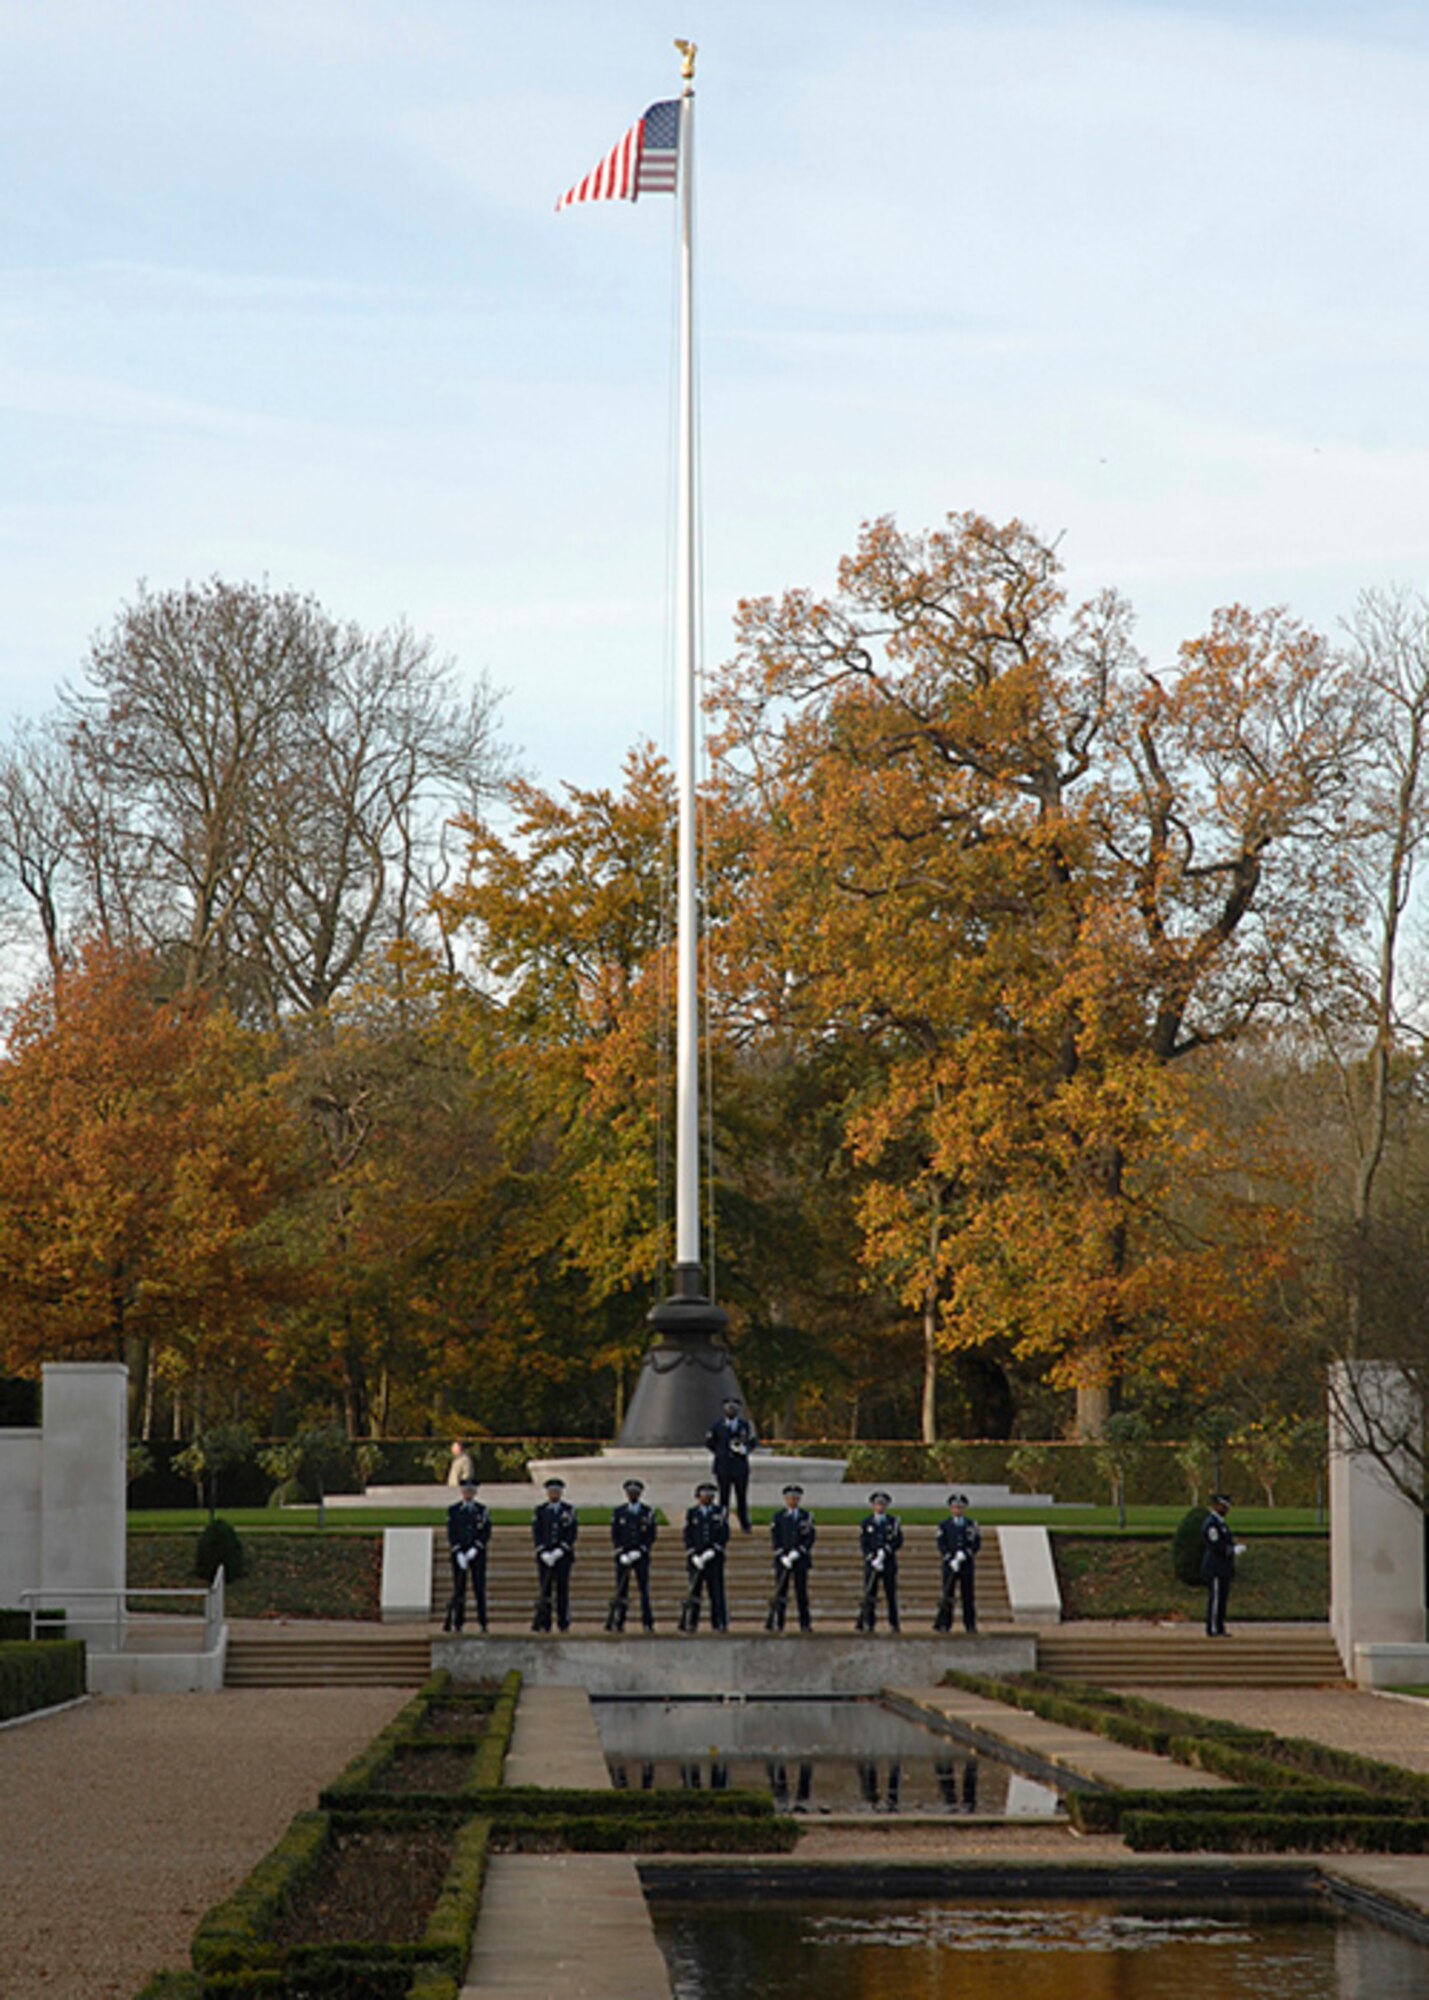 Members of the RAF Lakenheath Honor Guard stand and pay tribute to those who lost their lives fighting for the freedom of others at Madingley Cemetery in Cambridge, England. (U.S. Air Force photo by Senior Airman Brian J. Ellis)